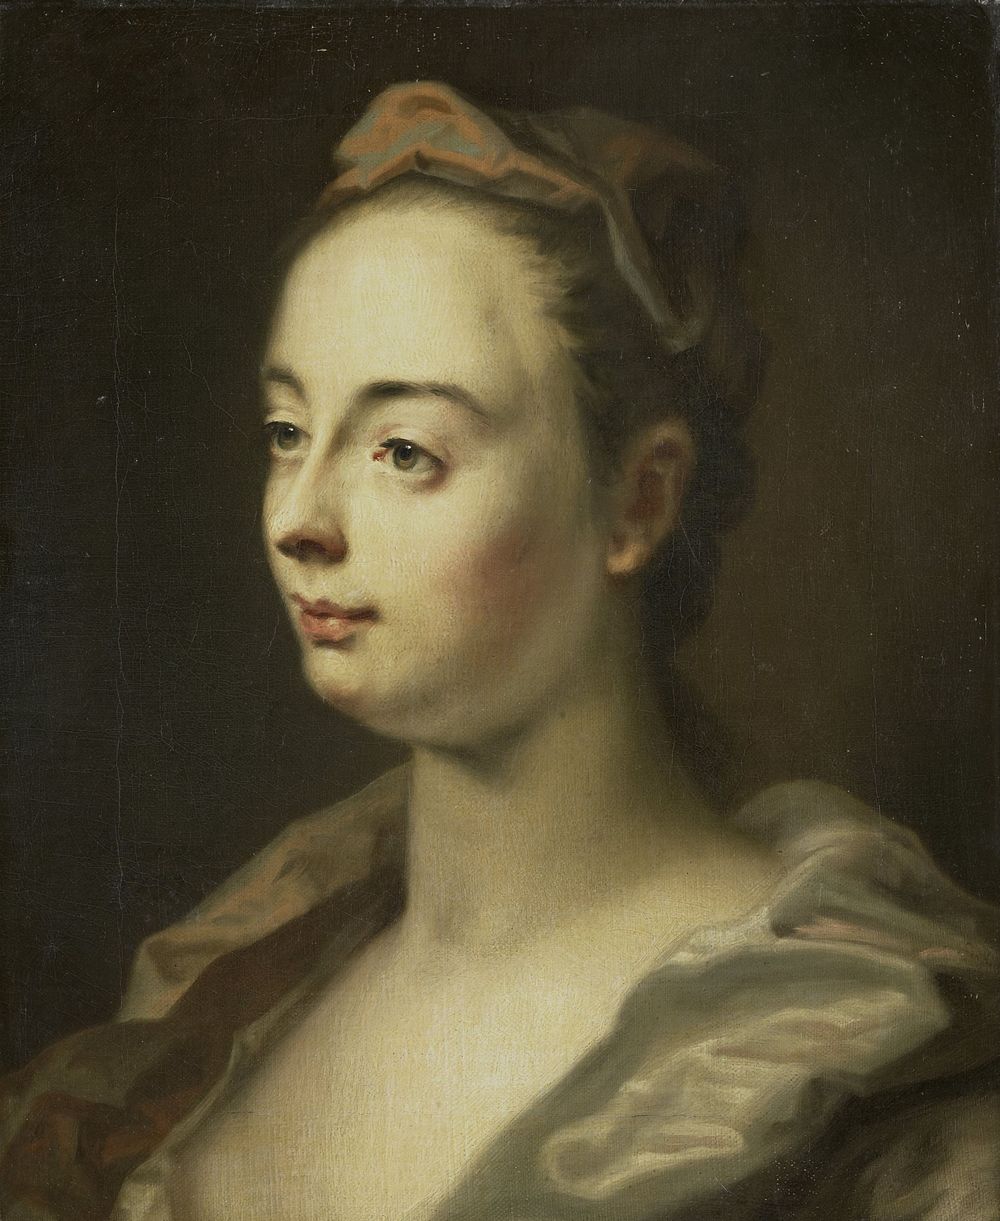 Portrait of a Woman (1731) by Balthasar Denner